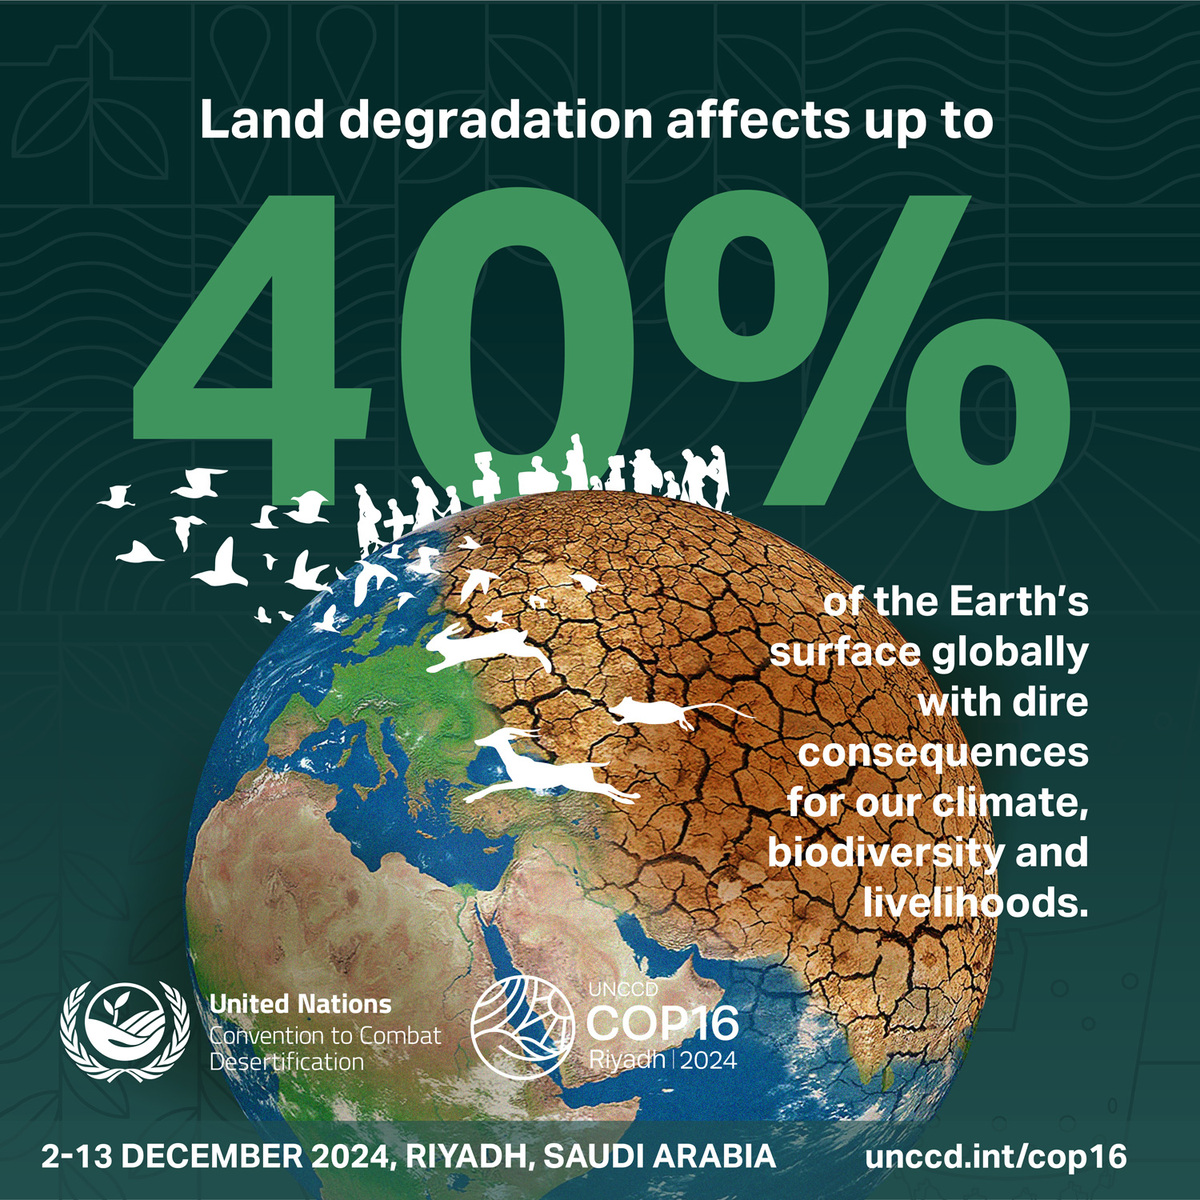 Land degradation affects us all, threatening climate, biodiversity, and our very livelihoods. By 2030, we might need to restore 1.5 billion hectares. Join us at #UNCCDCOP16 to advocate for an urgent, achievable solution for our planet. #UNited4Land #GenerationRestoration…